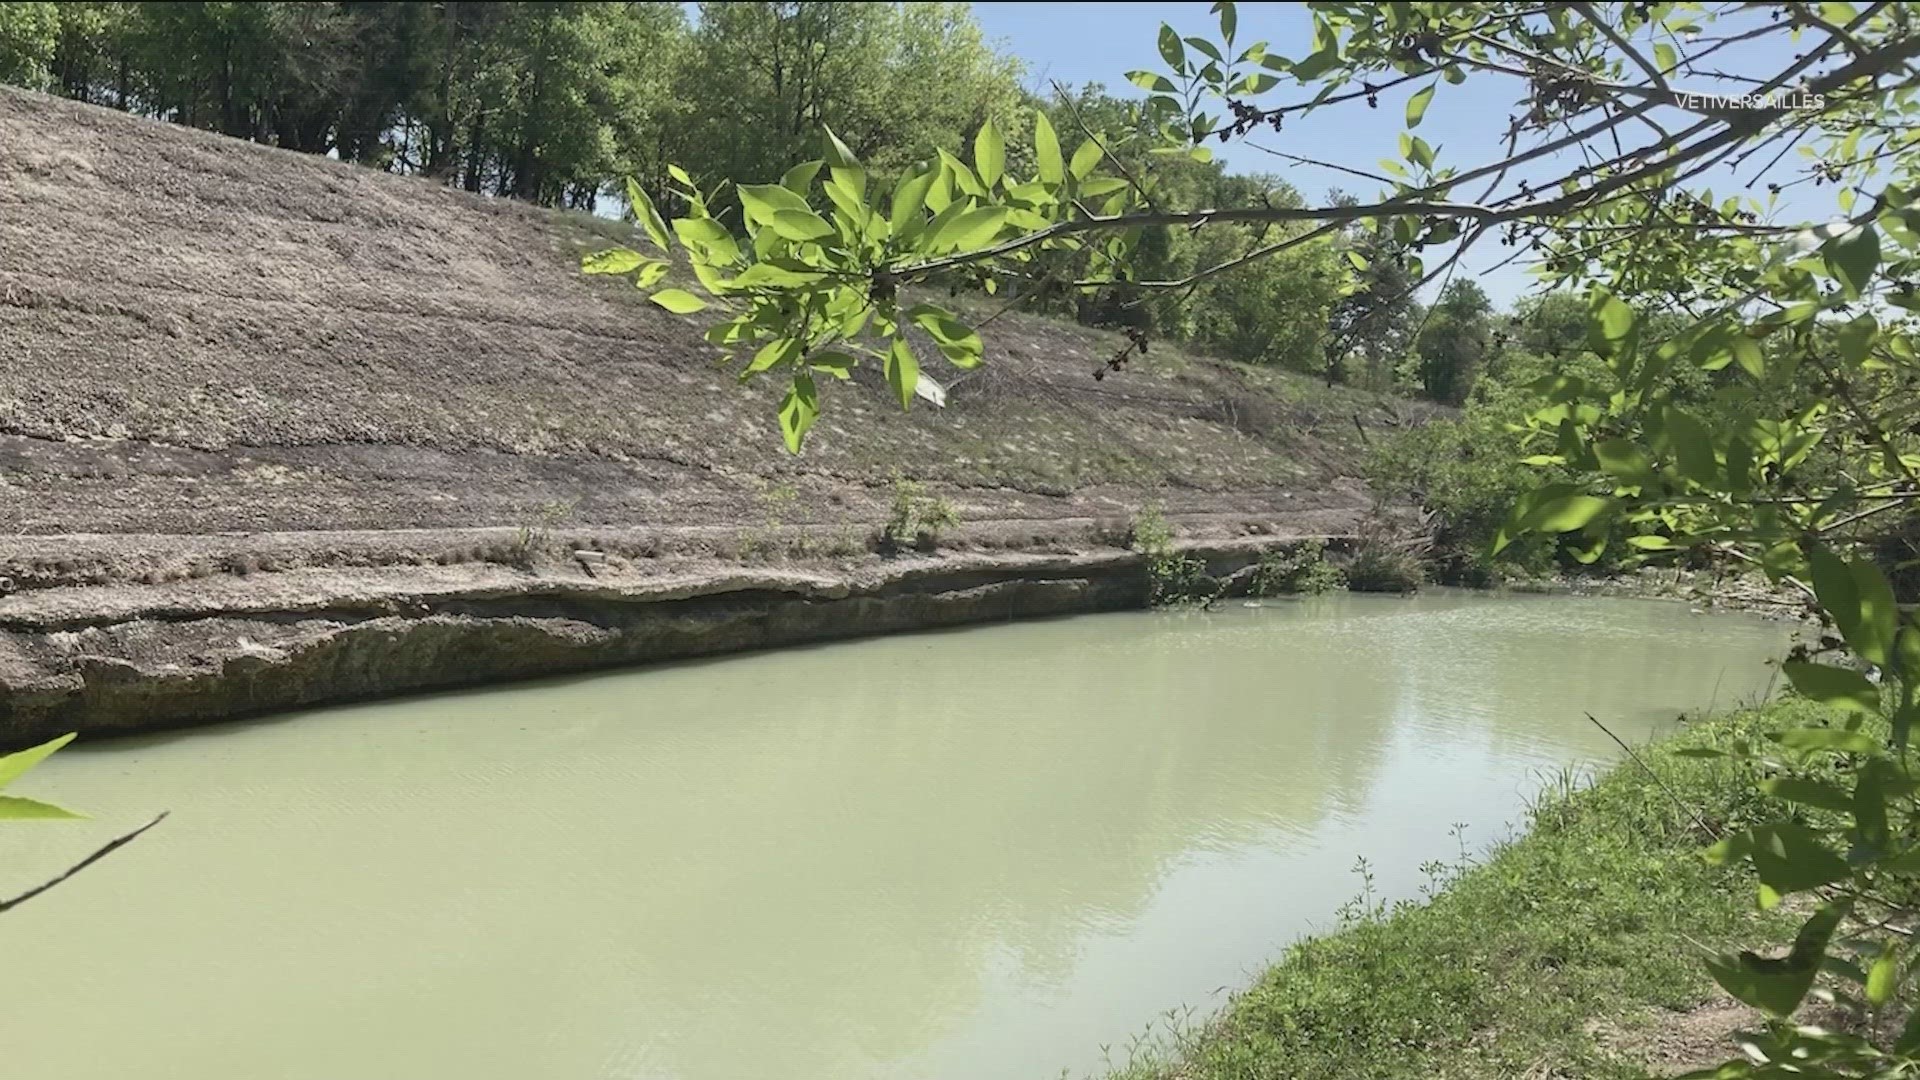 Many Austinites have taken to social media to express concerns over Shoal Creek's current chalky-green appearance.